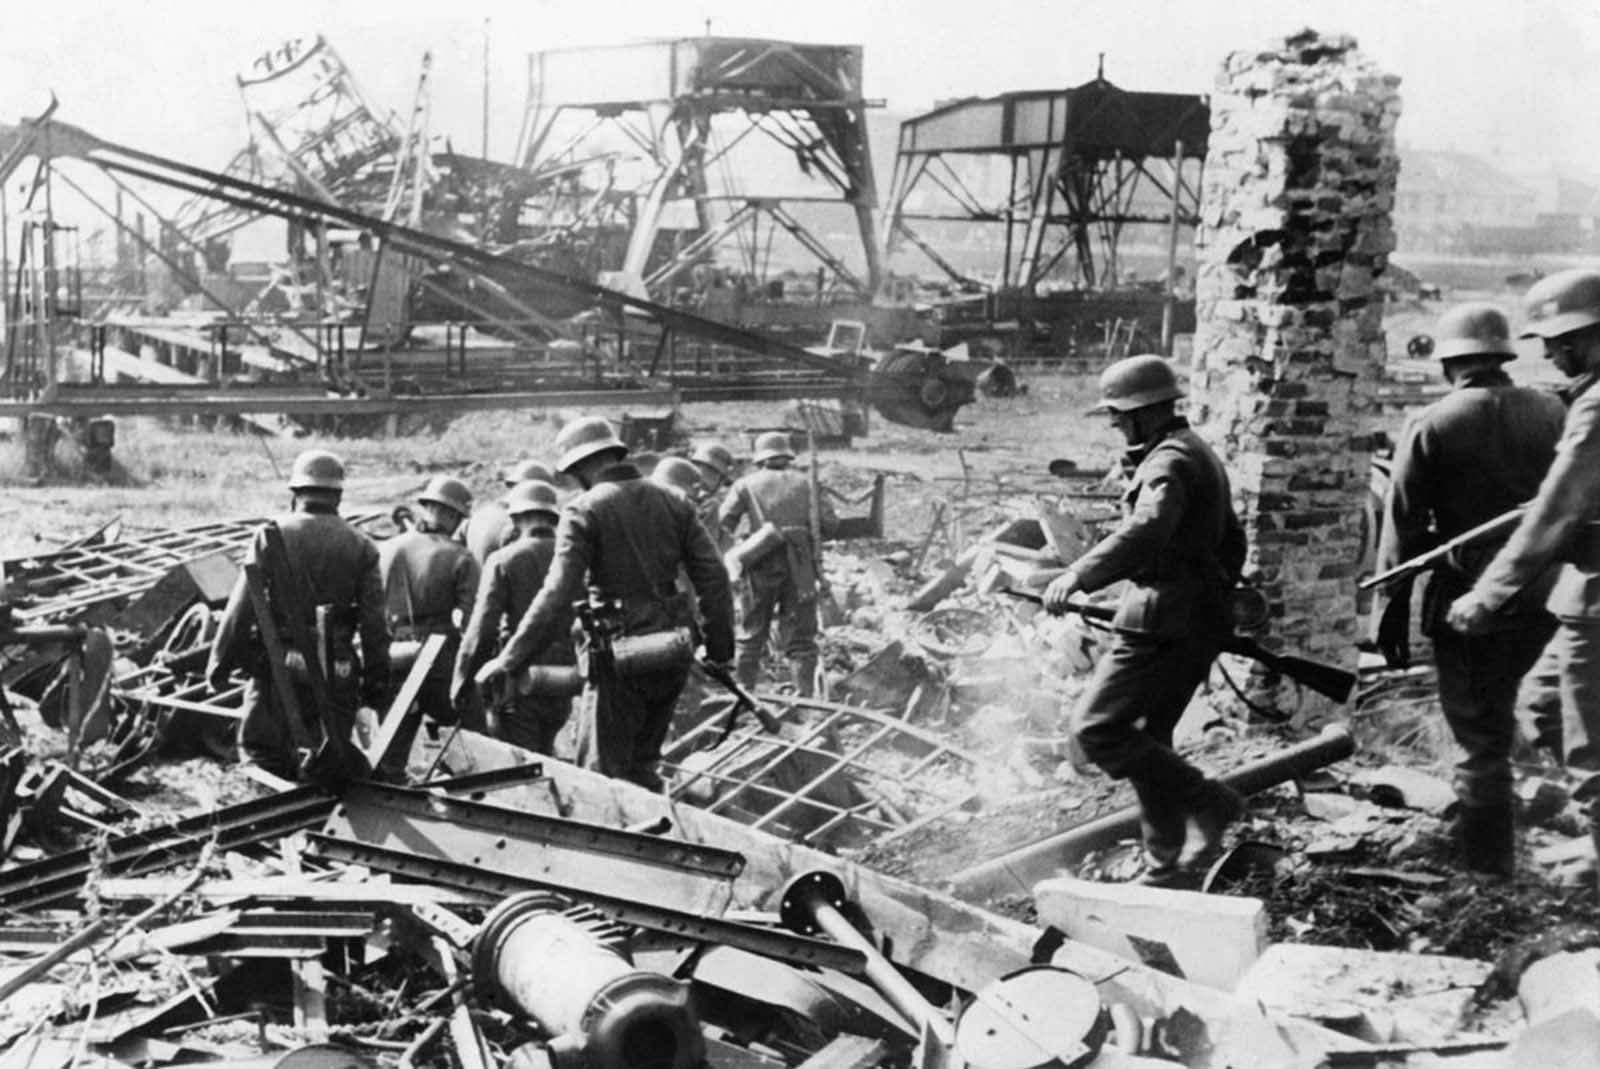 German soldiers comb the Westerplatte after it was surrendered to German units from the Schleswig-Holstein landing crew, on September 7, 1939. Fewer than 200 Polish soldiers defended the small peninsula, holding off the Germans for seven days.